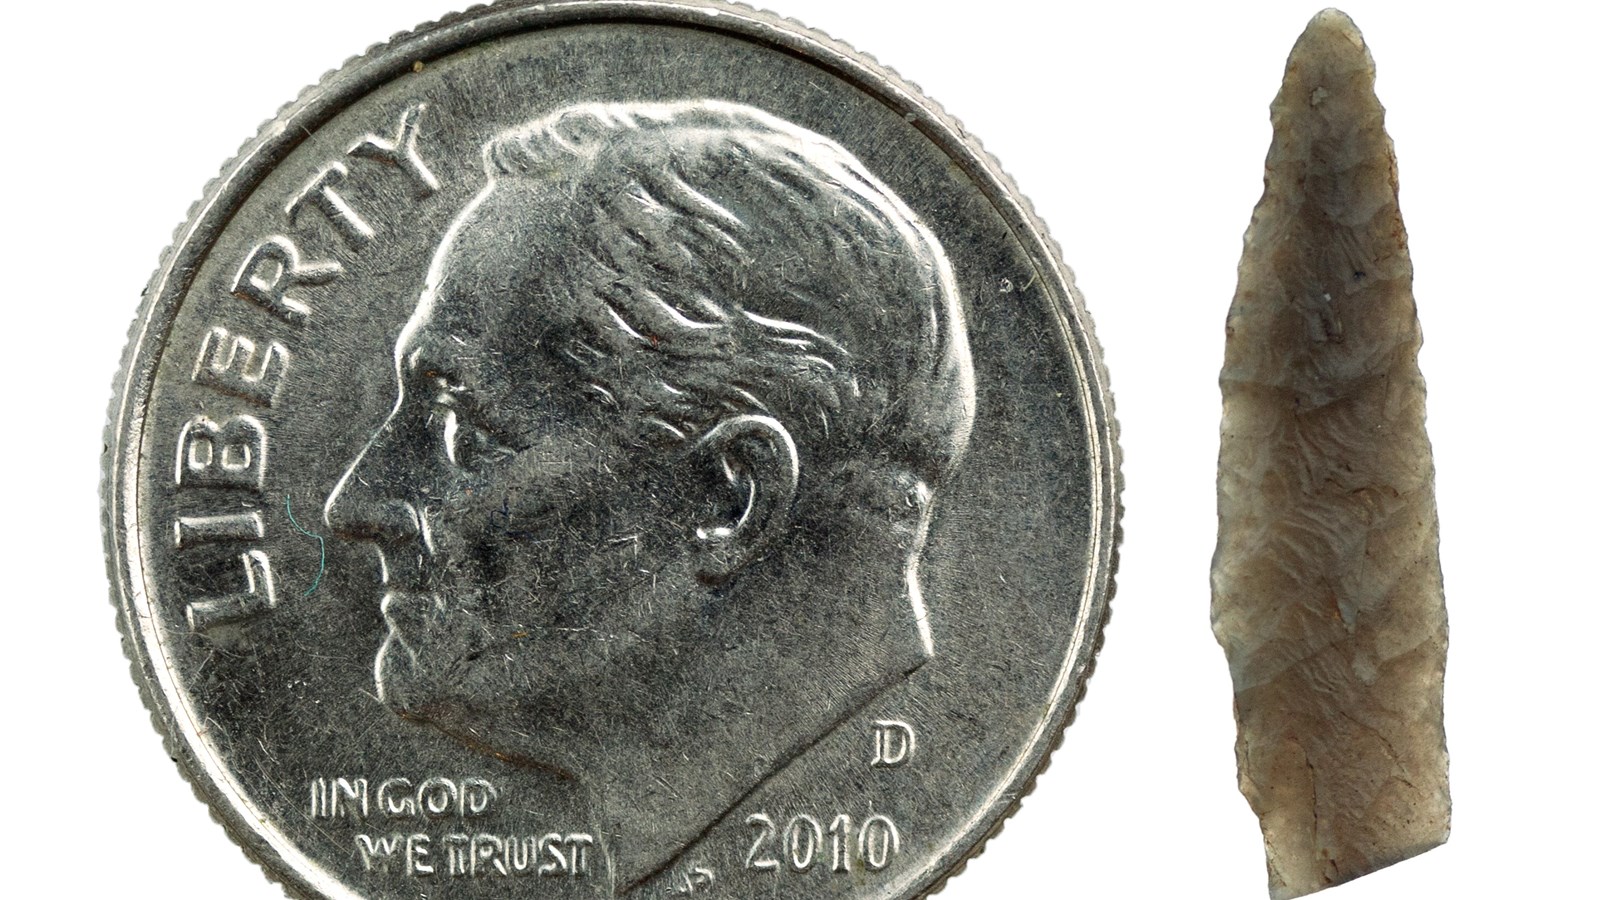 A carved pointed stone tool next to a U.S. dime showing they are the same size.